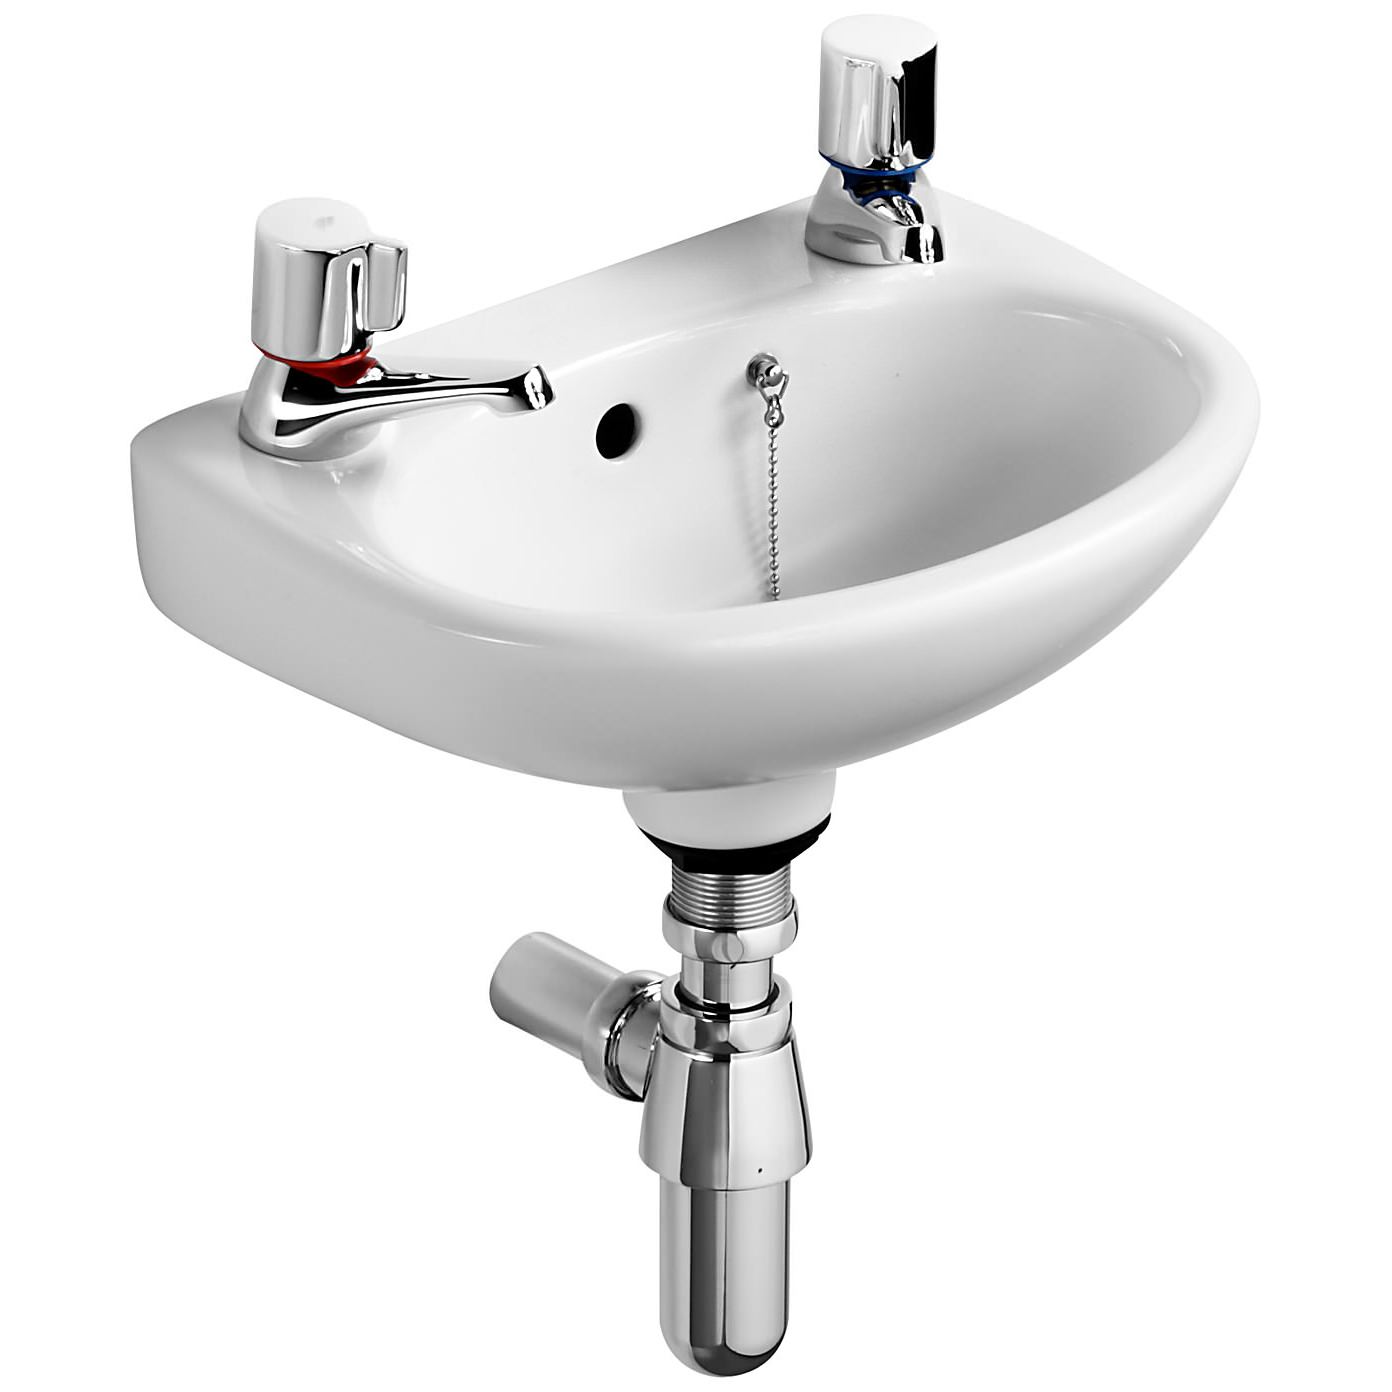 List 96+ Pictures A Picture Of A Basin Superb 10/2023